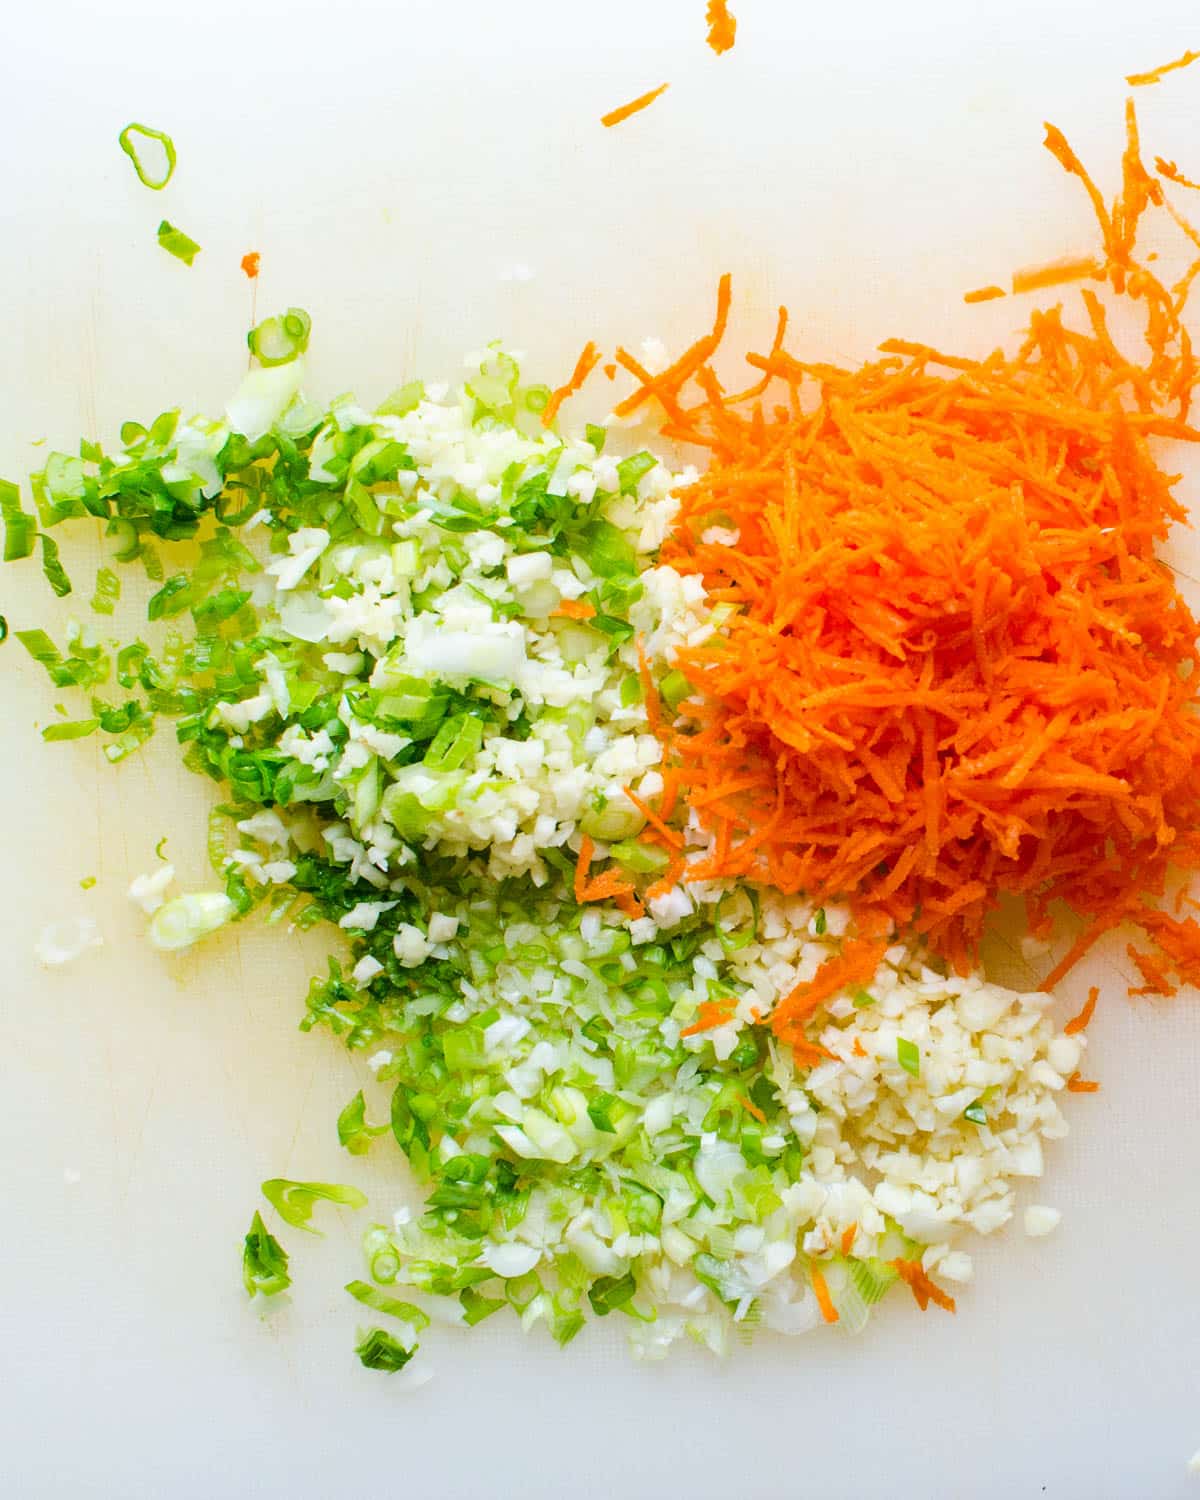 Carrots, garlic and scallions, finely minced.